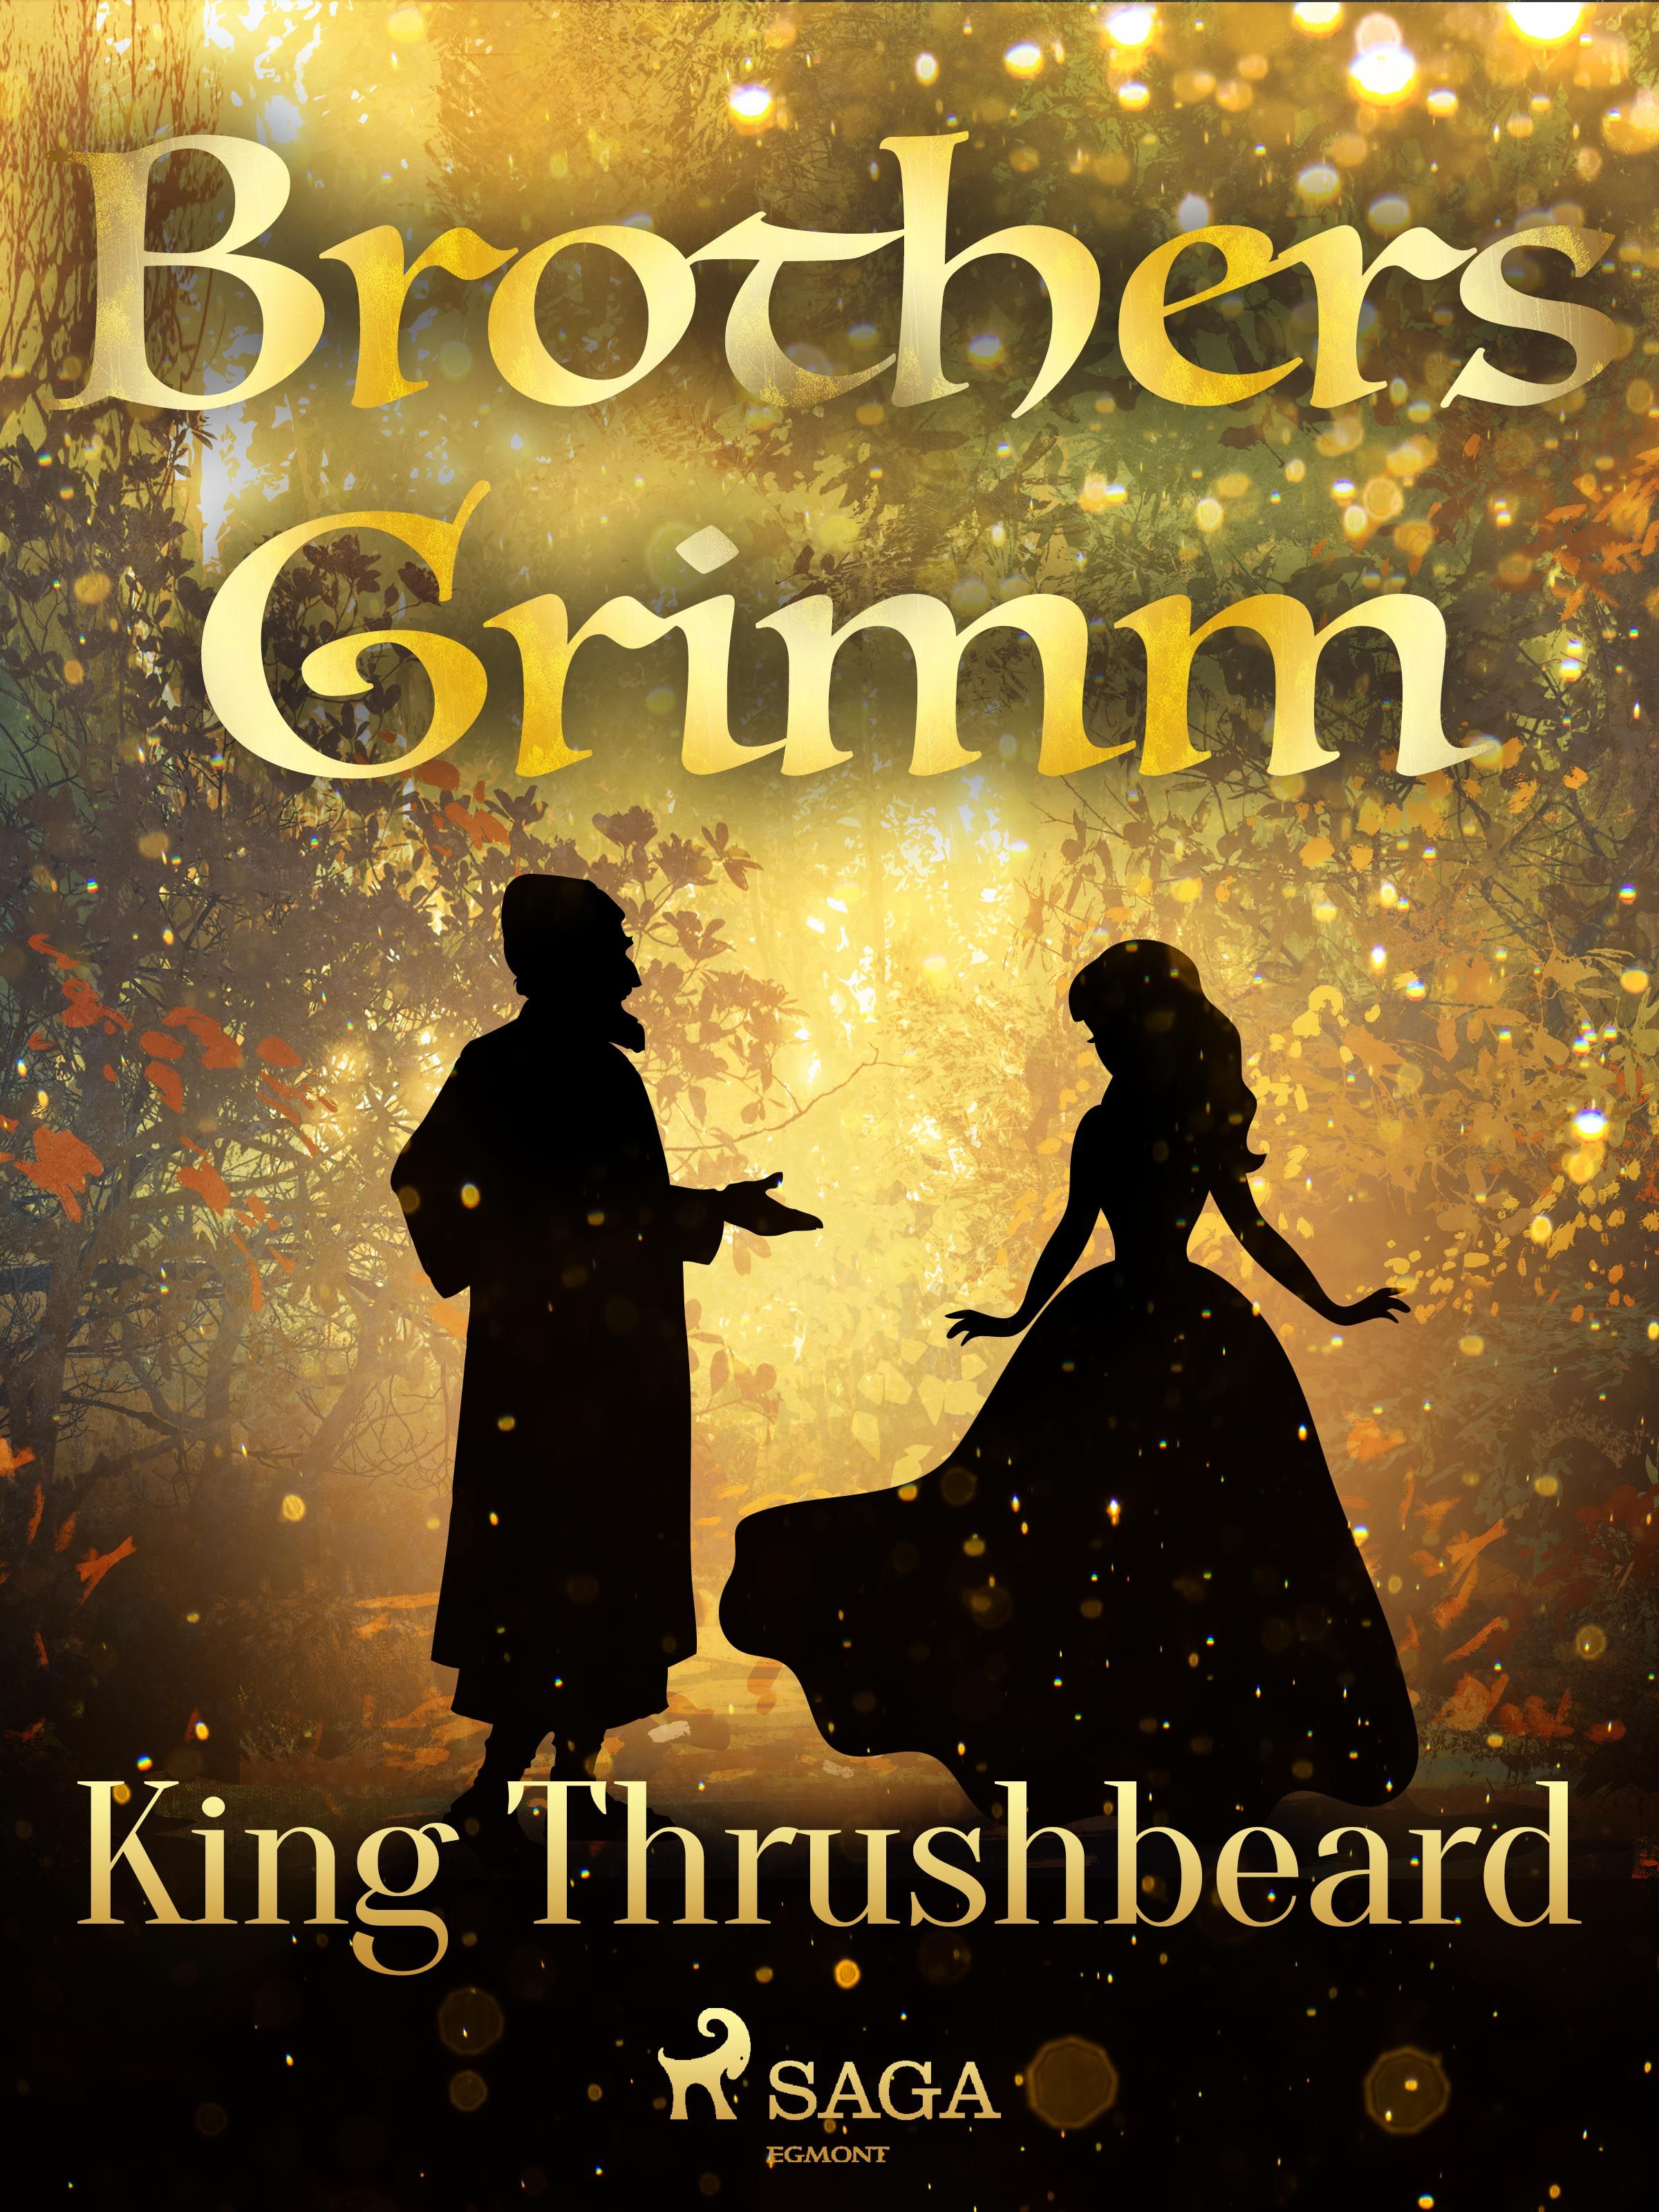 King Thrushbeard, eBook by Brothers Grimm